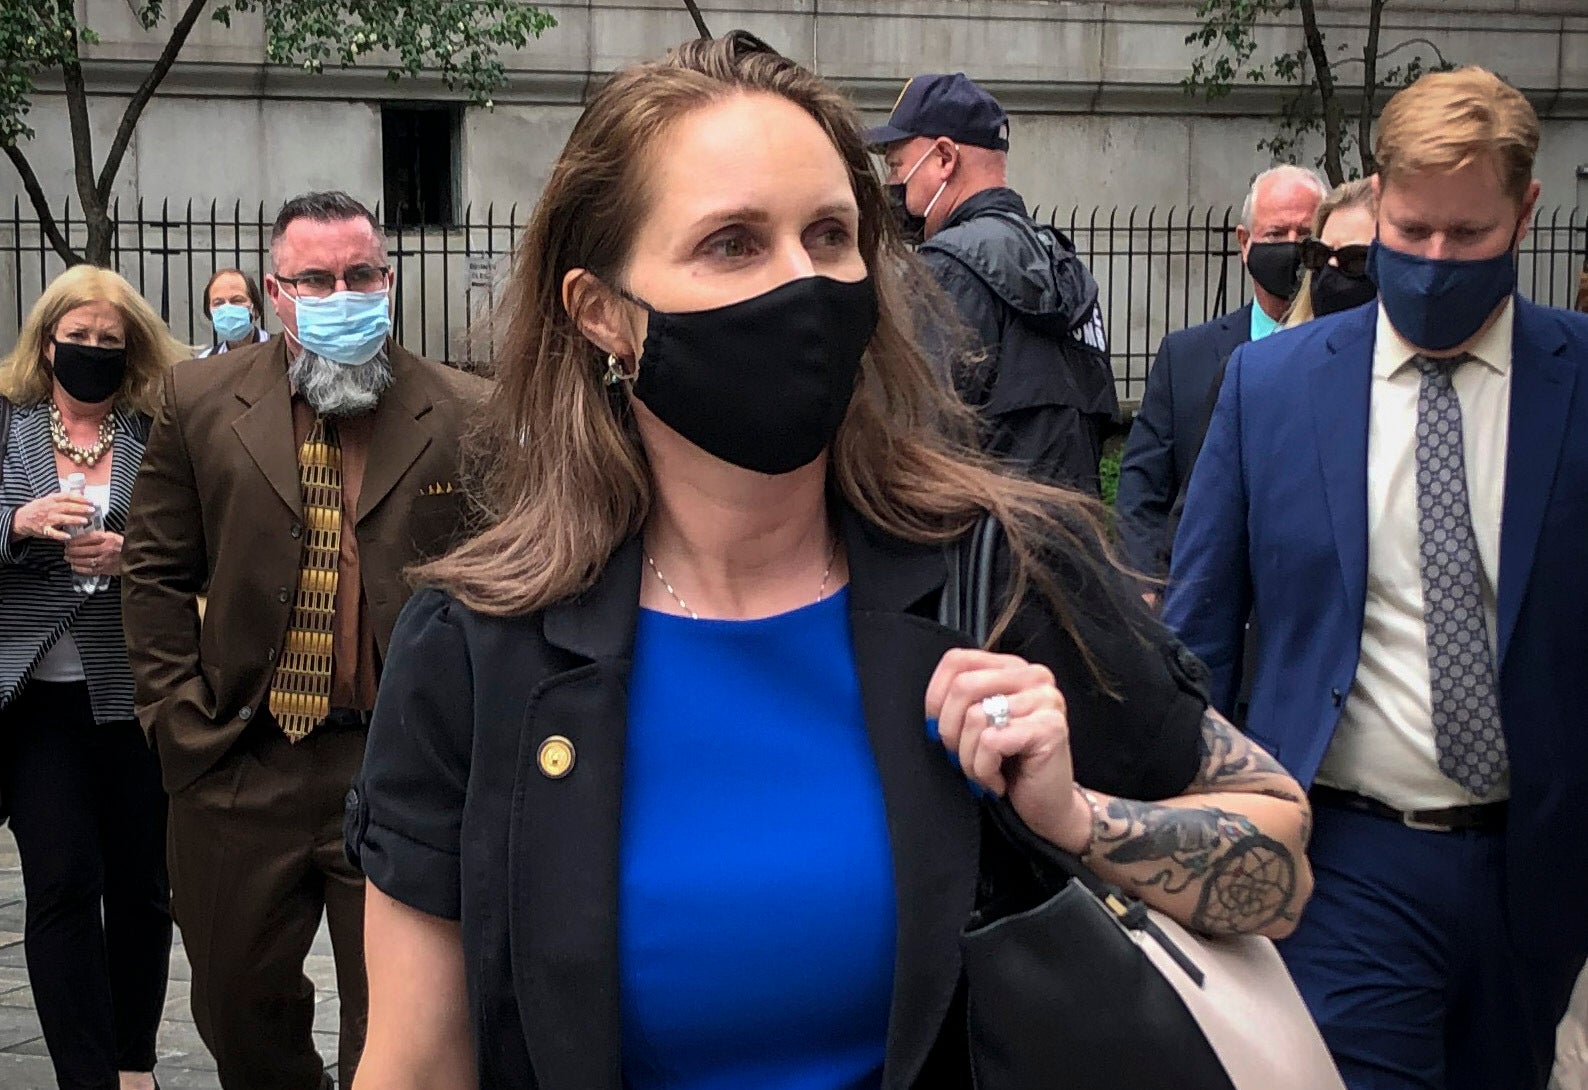 Natalie Mayflower Sours Edwards, centre, leaves court after receiving a six-month prison sentence for leaking confidential financial reports to a journalist at Buzzfeed